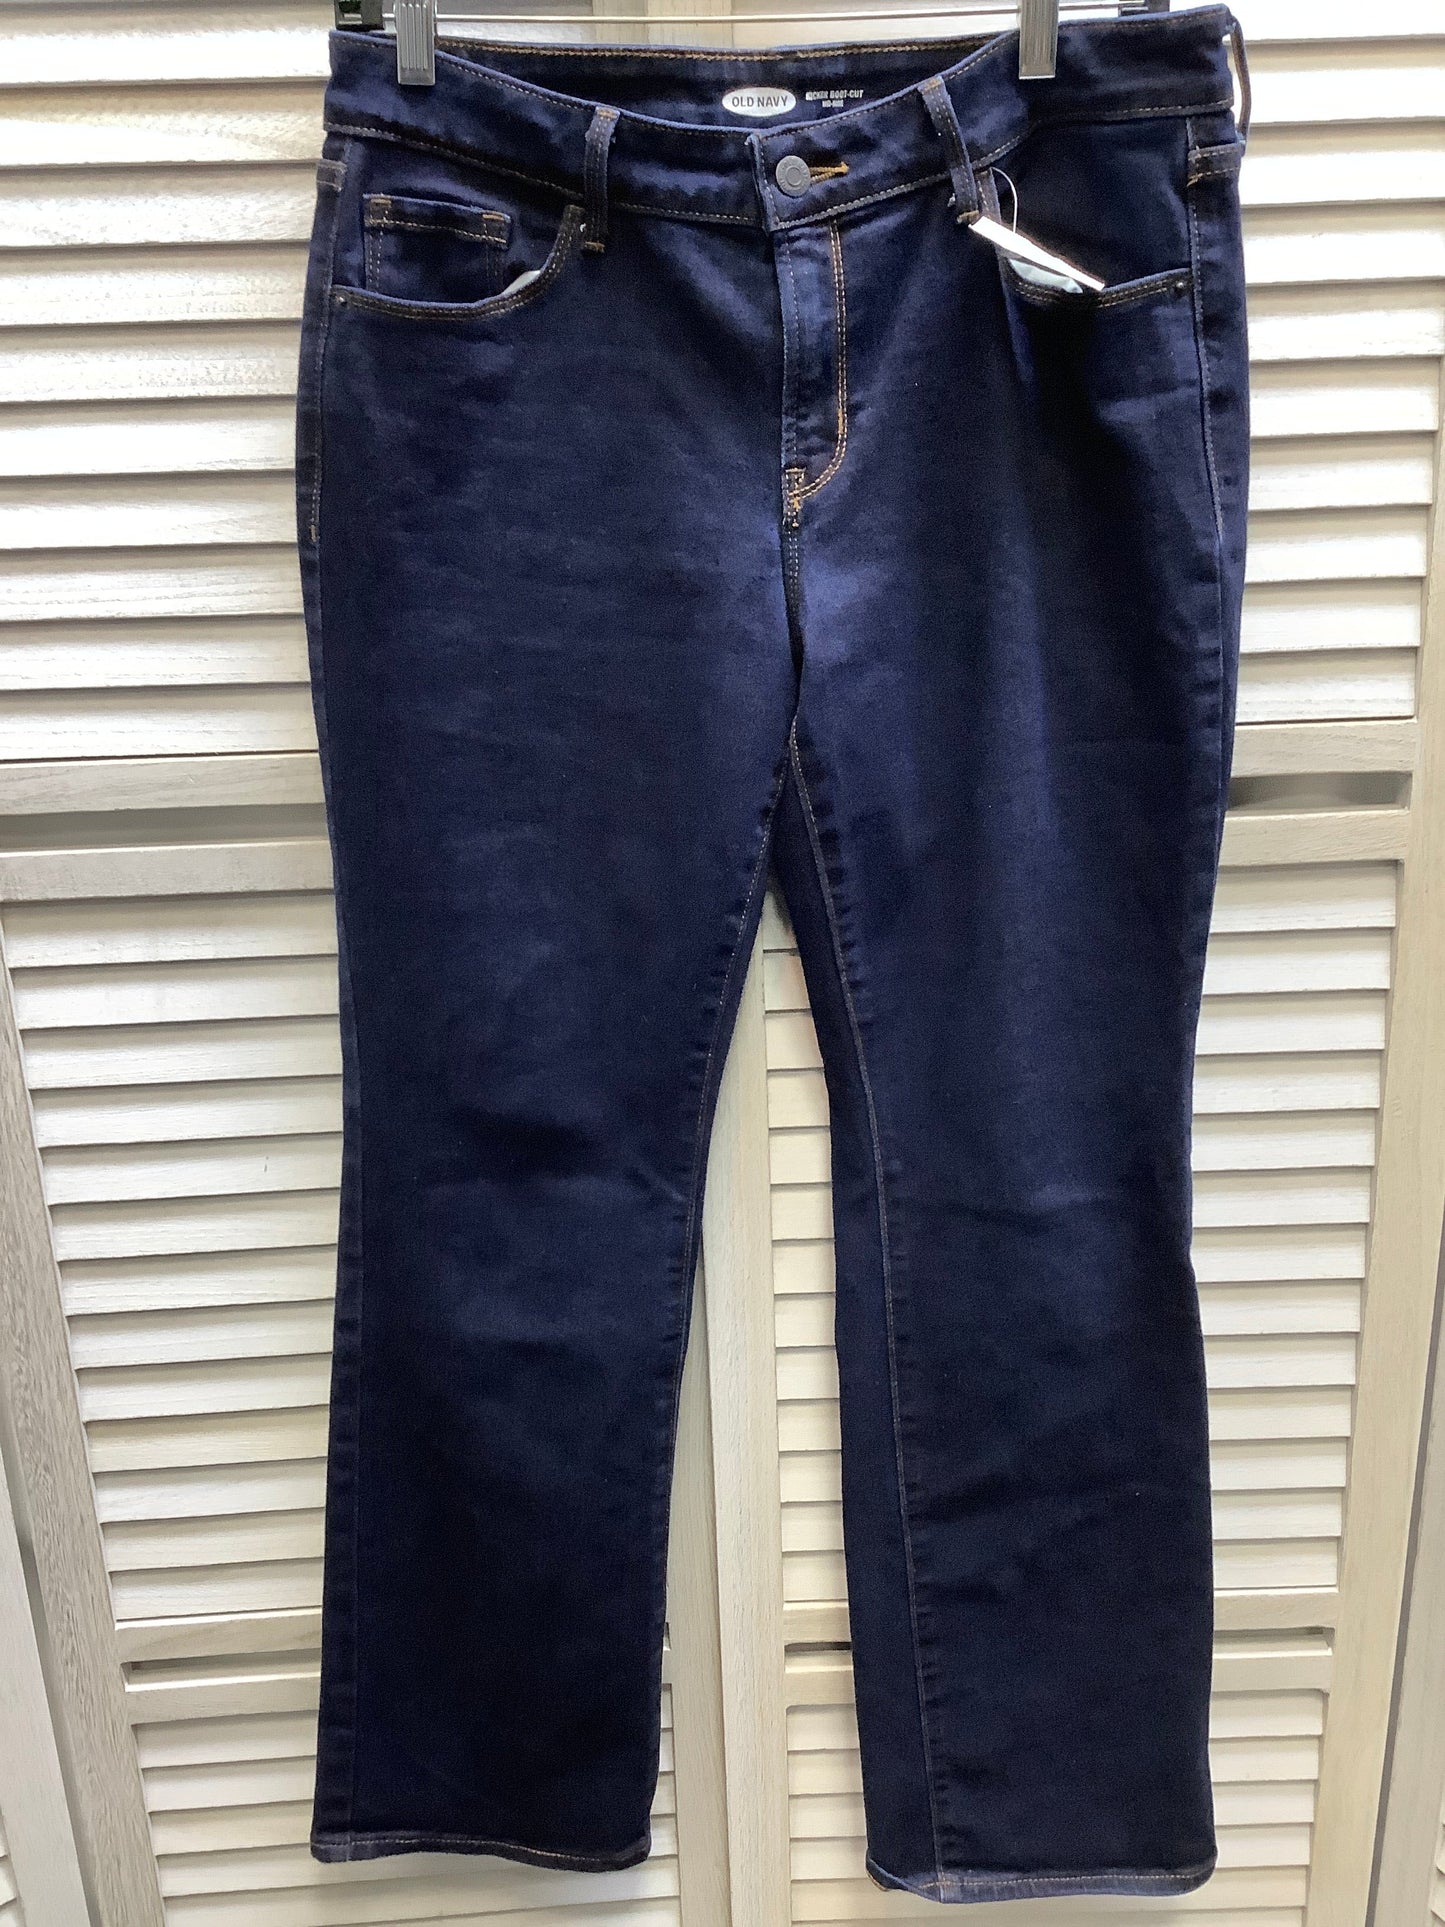 Blue Denim Jeans Boot Cut Old Navy, Size 10